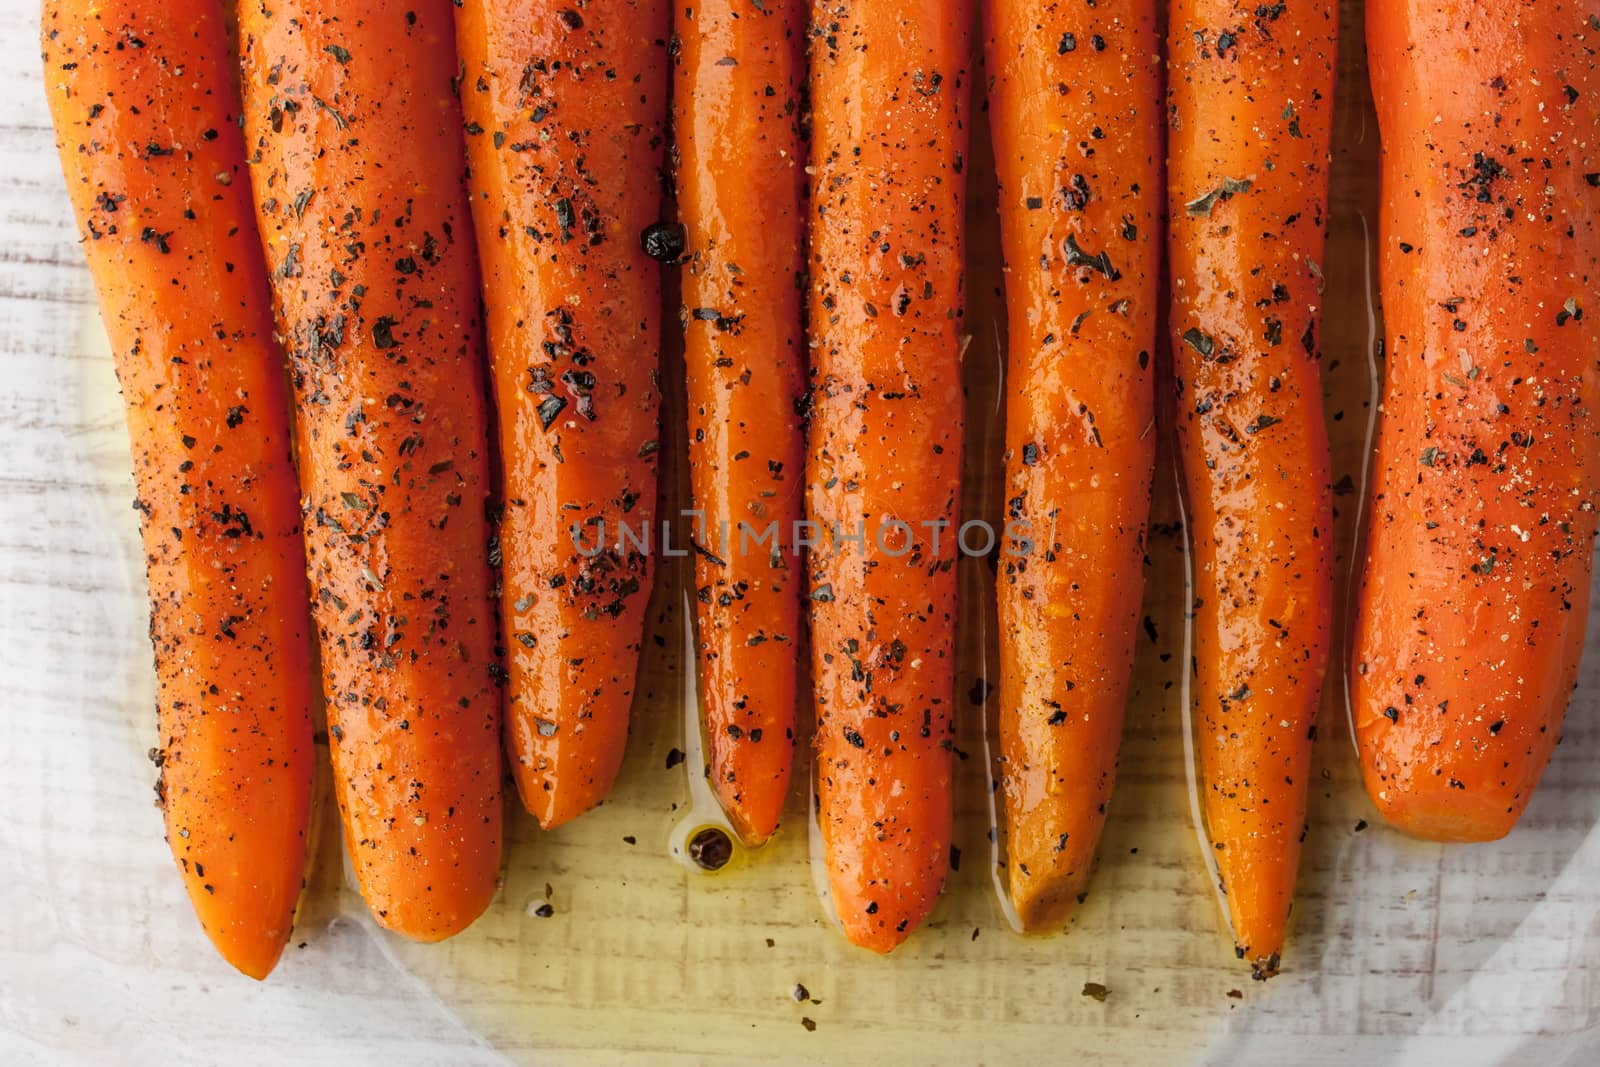 Top of baked carrots with black pepper and herbs